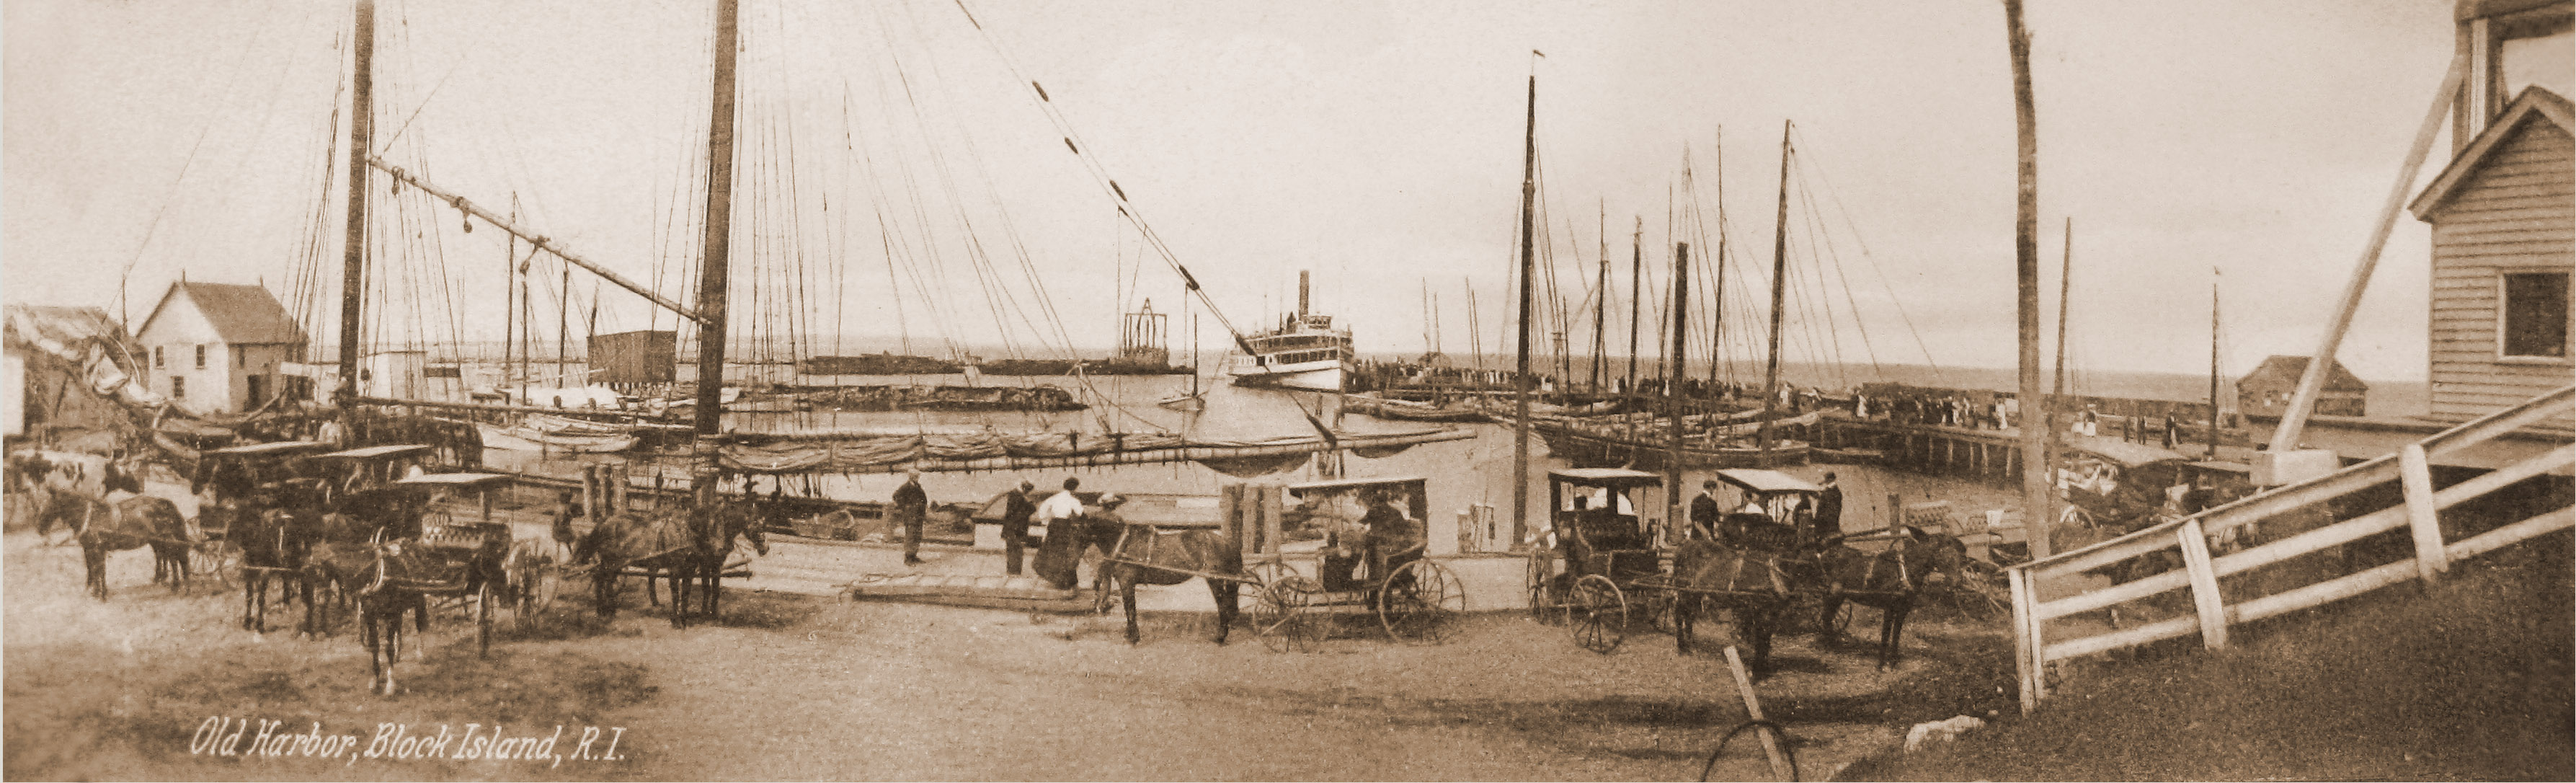 Old Harbor Carriages.jpg